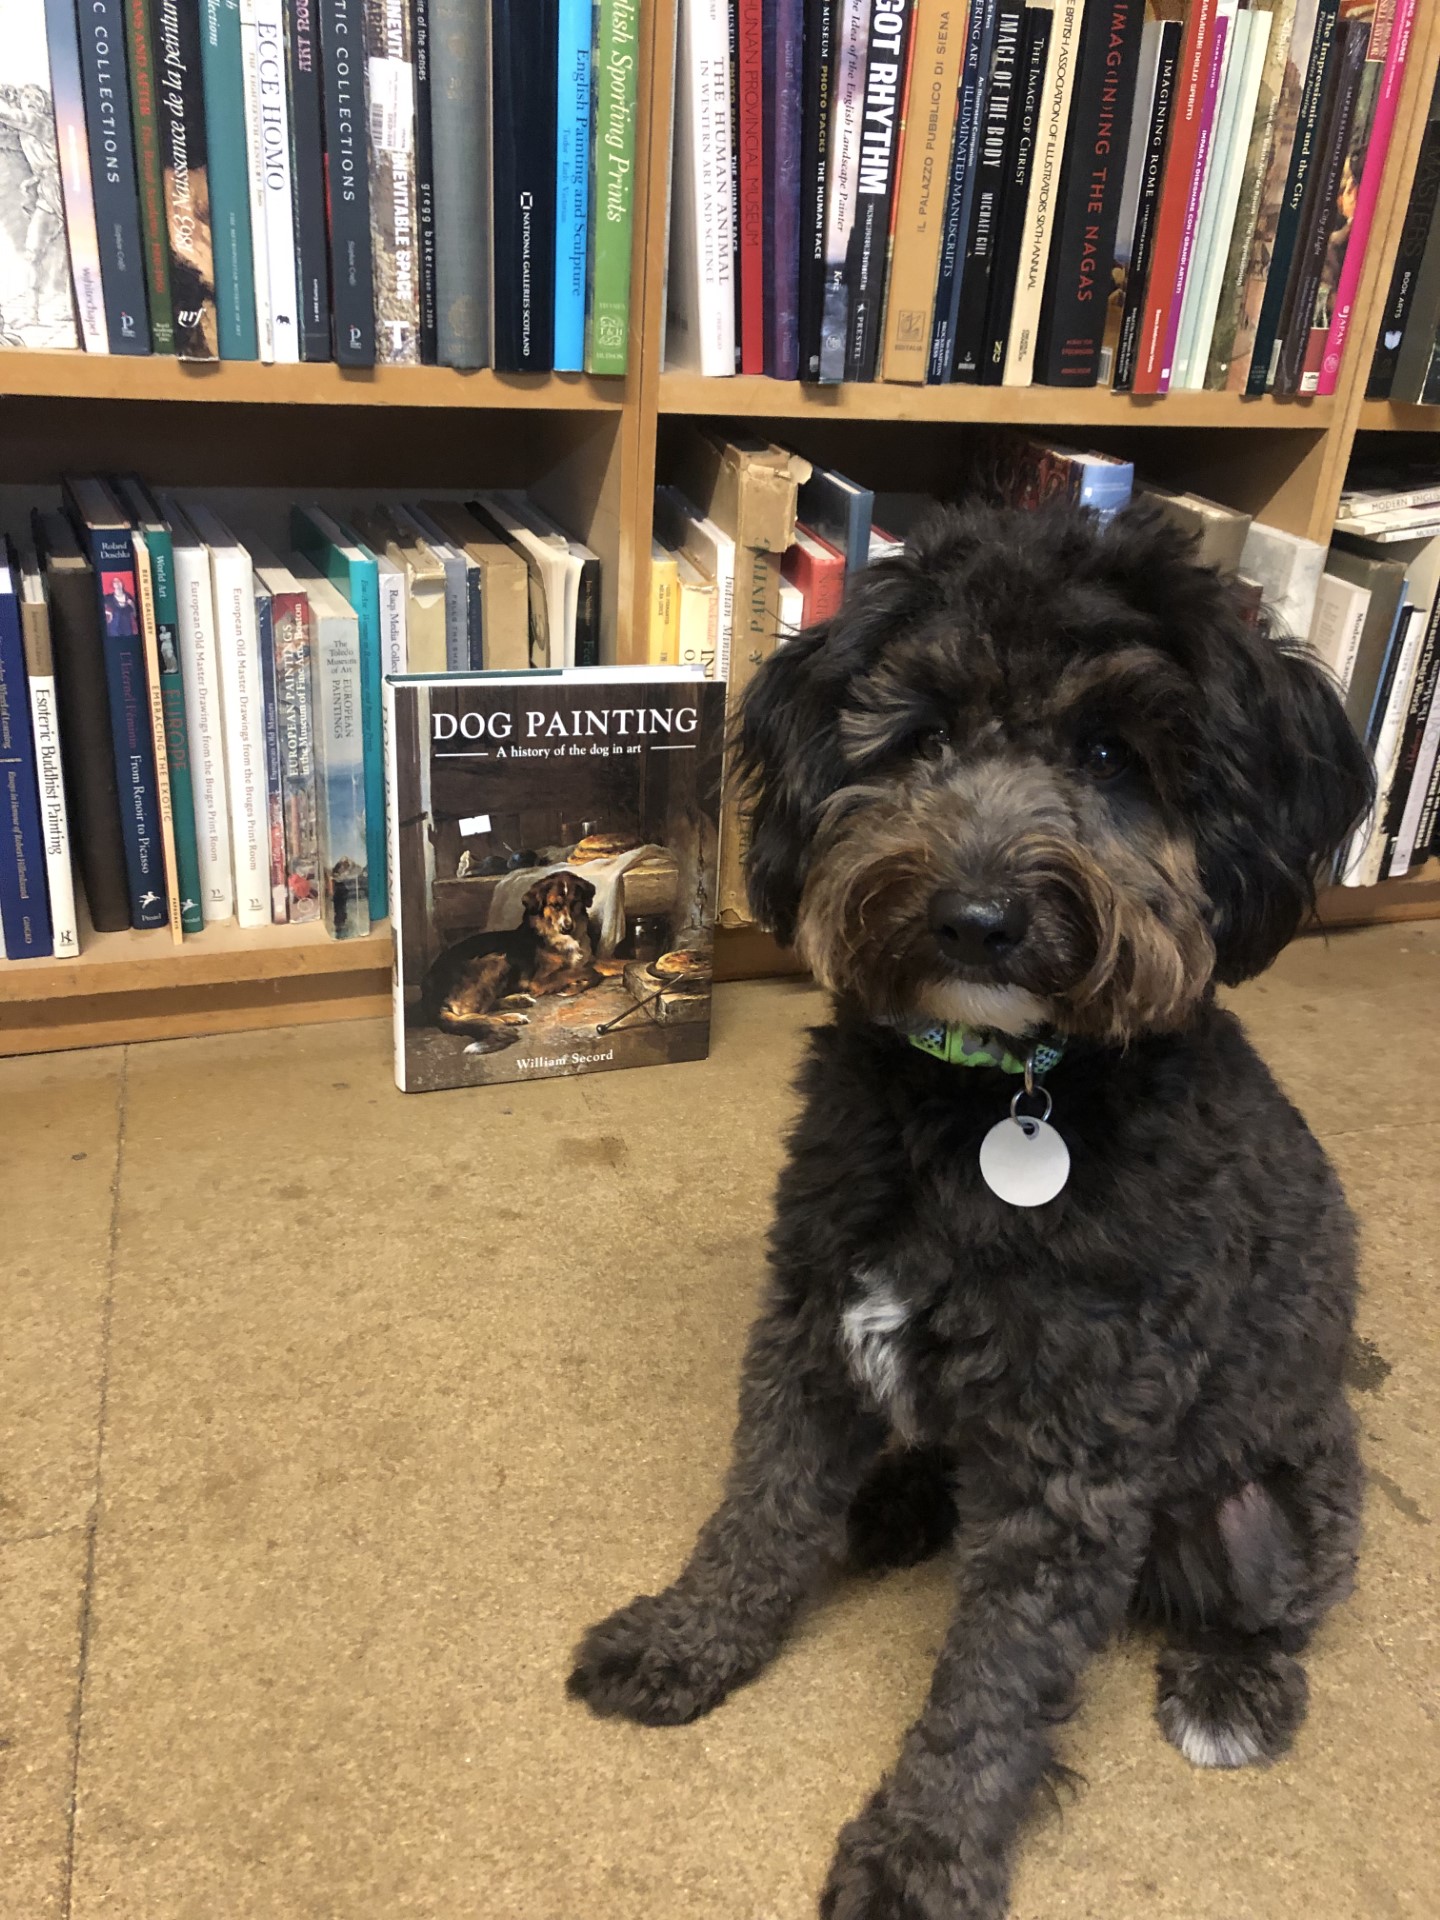 Byron the dog in front of the art bookshelves